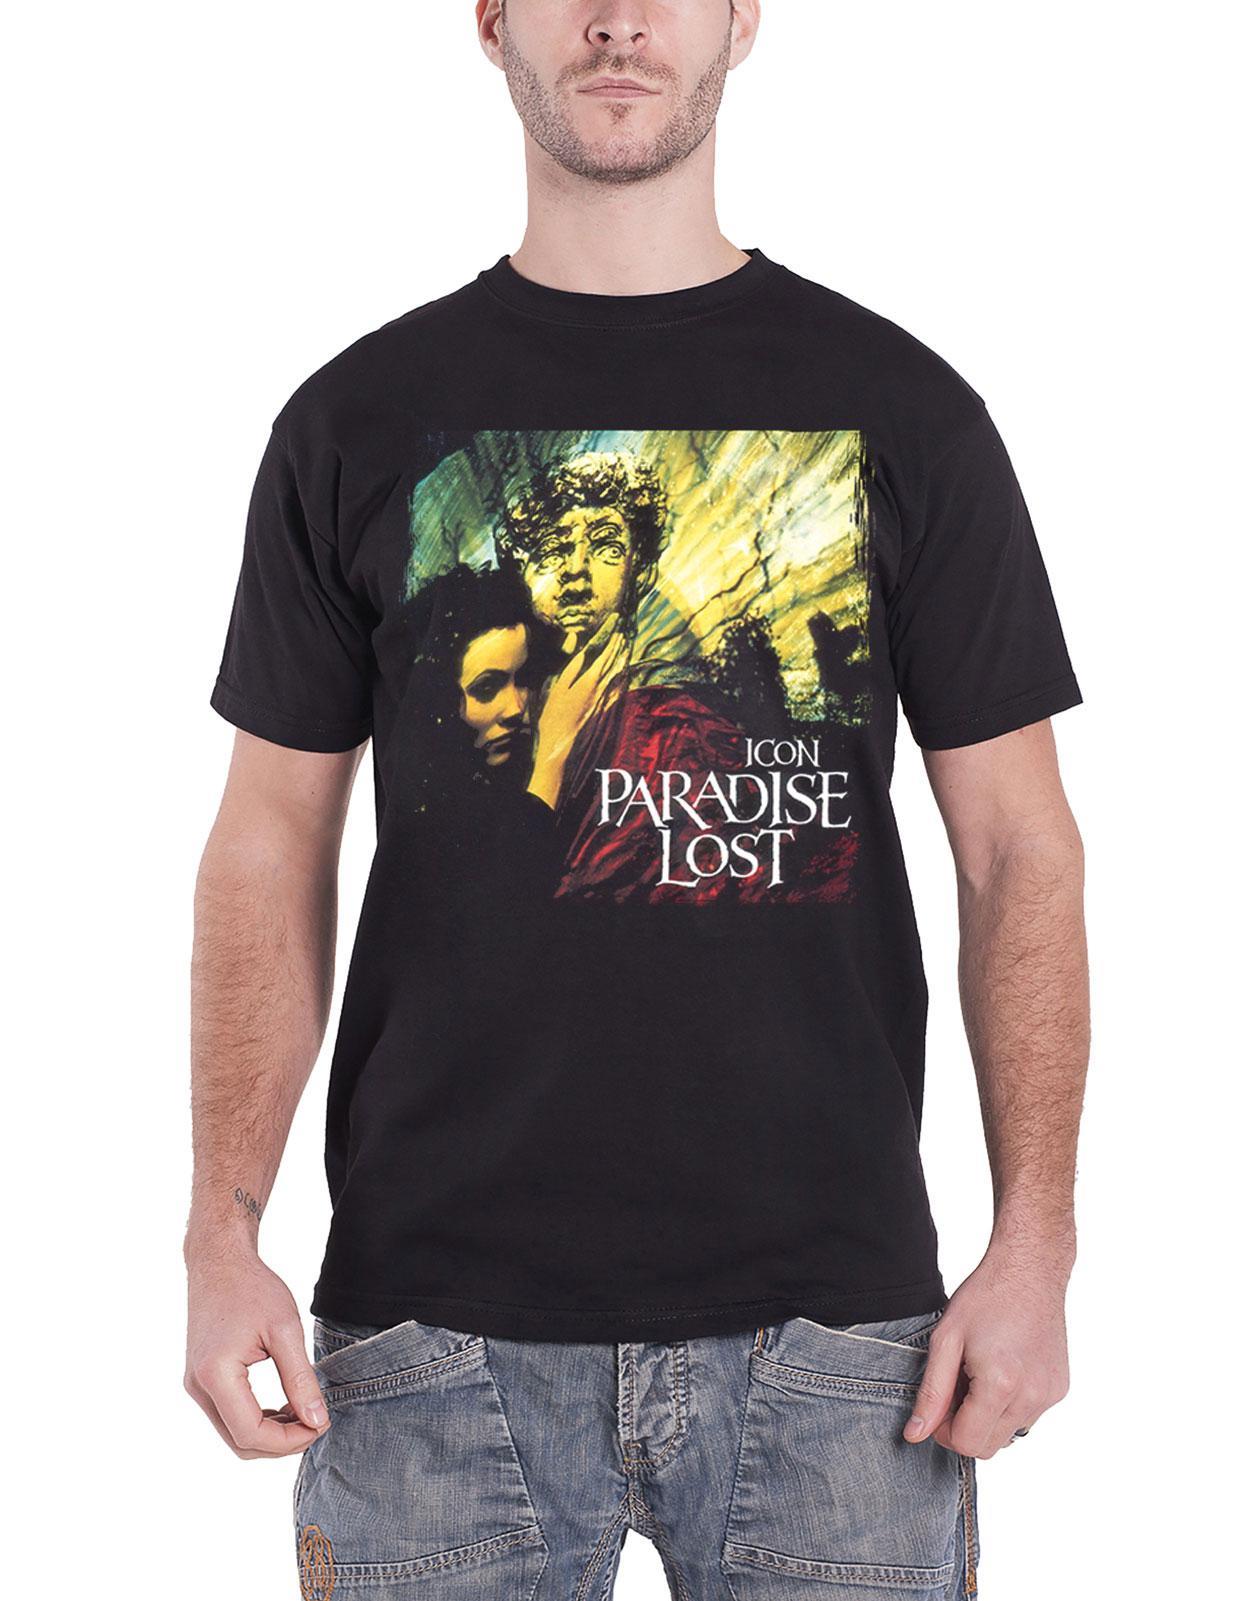 Paradise Lost T Shirt Icon album band logo new Official Mens Black